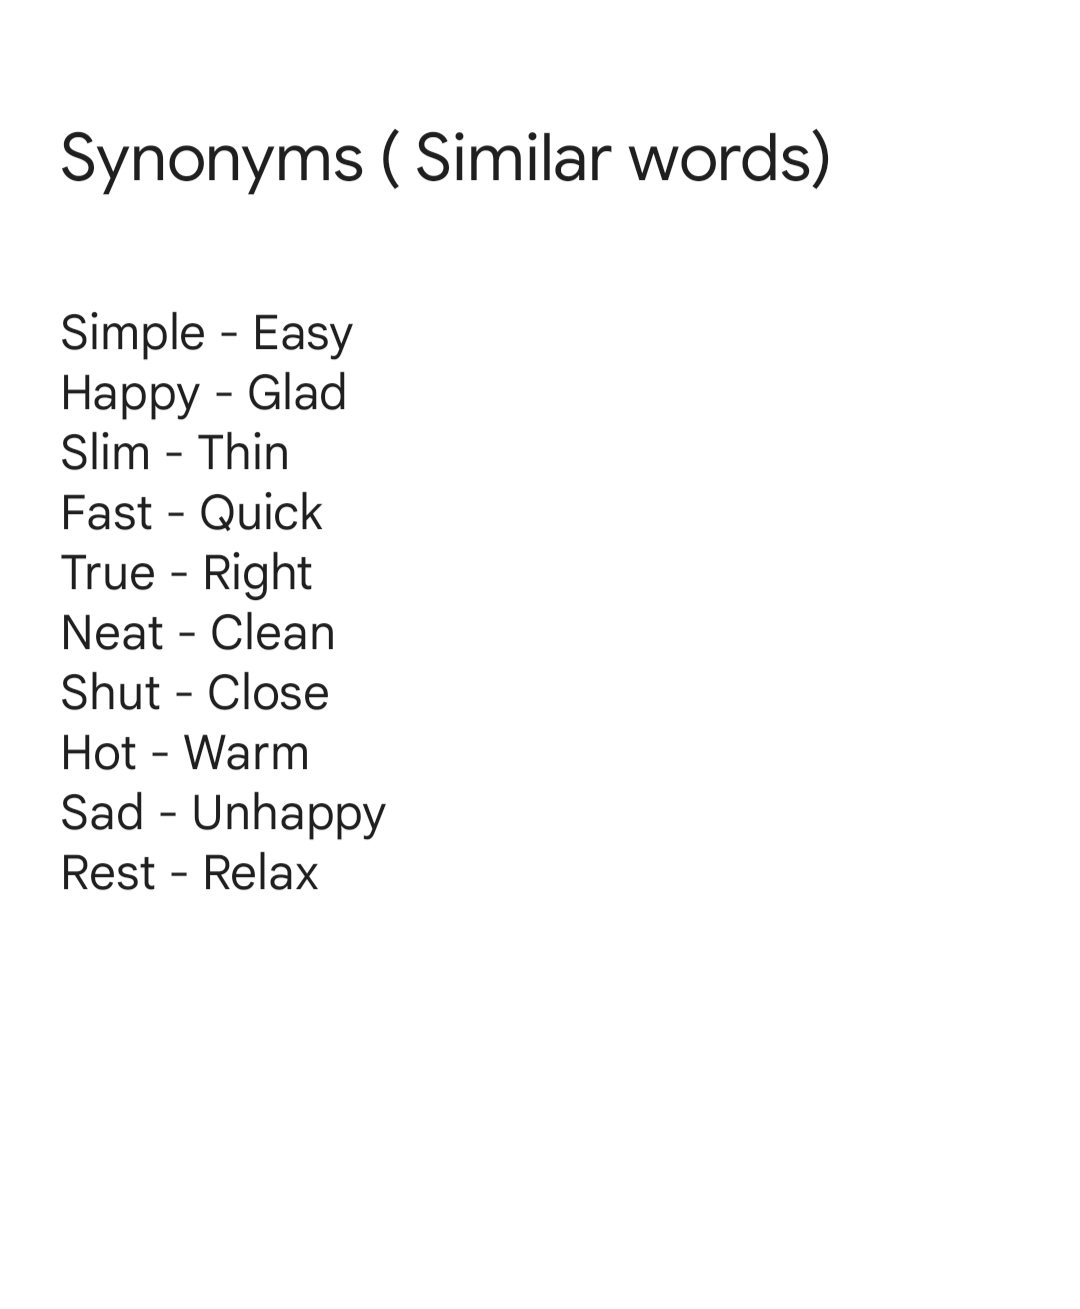 English: Quarter 3 - Module 3: Antonyms and Synonyms | PDF | Vocabulary |  Learning